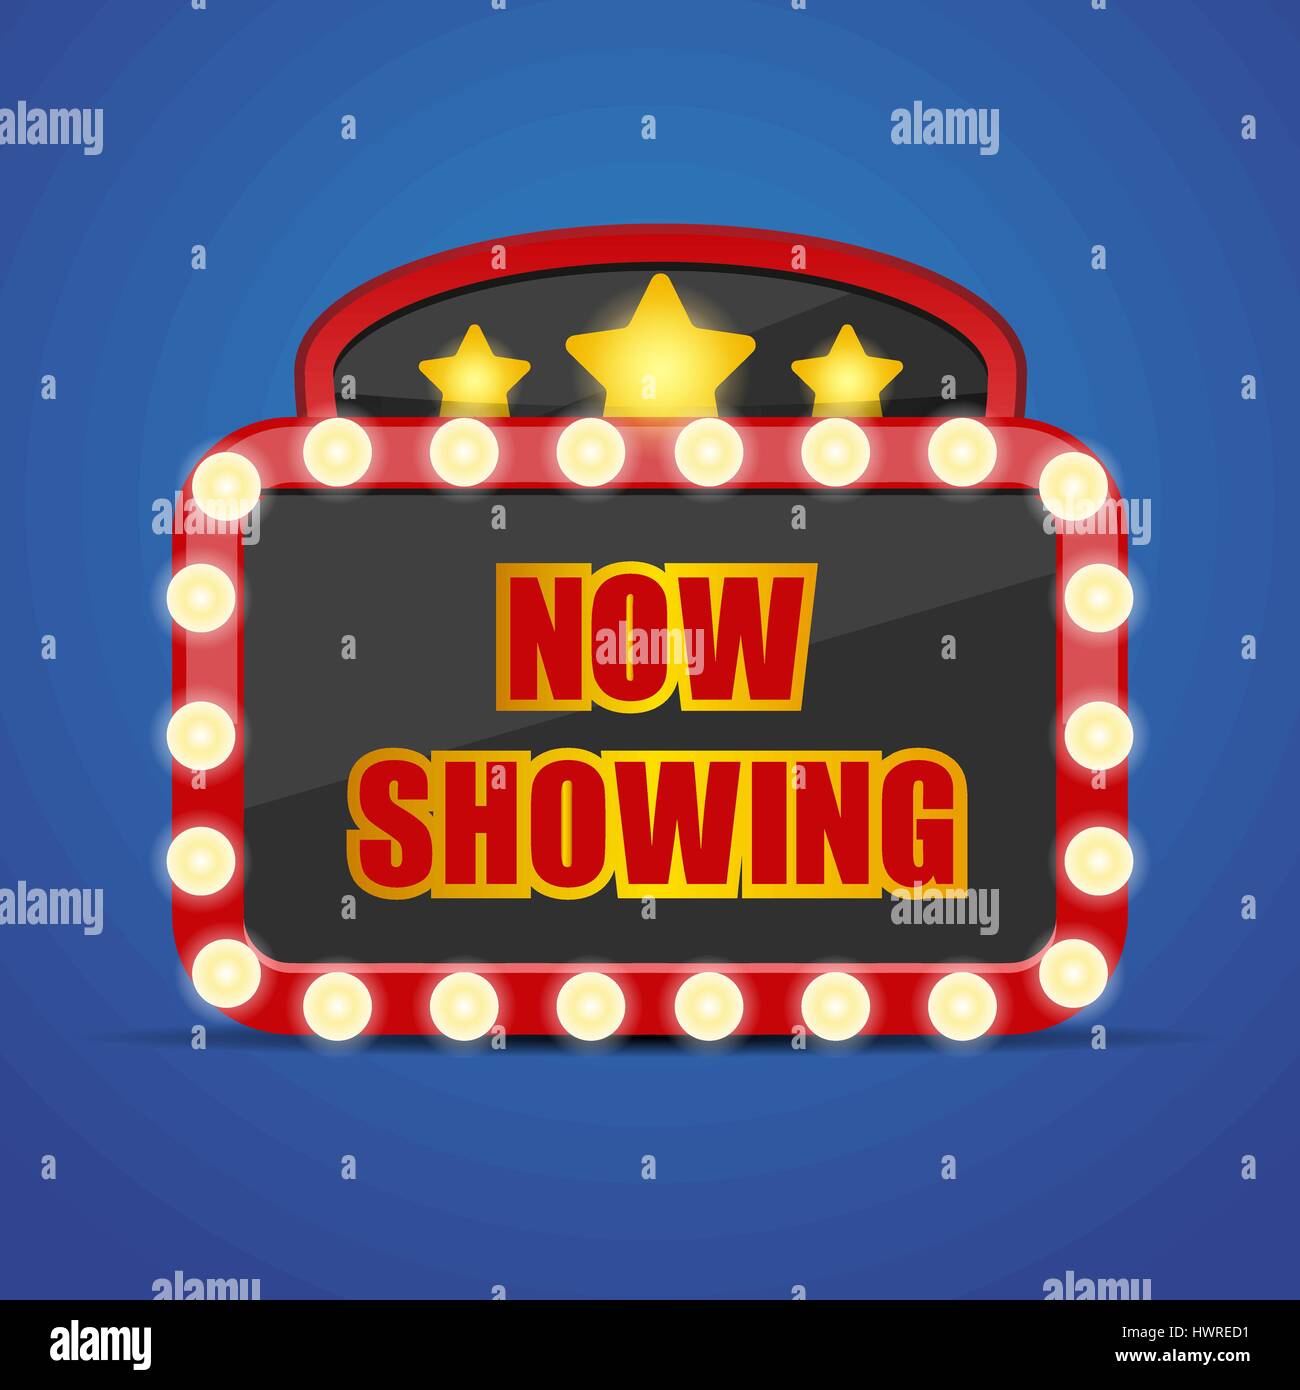 Now showing sign vector illustration Stock Vector